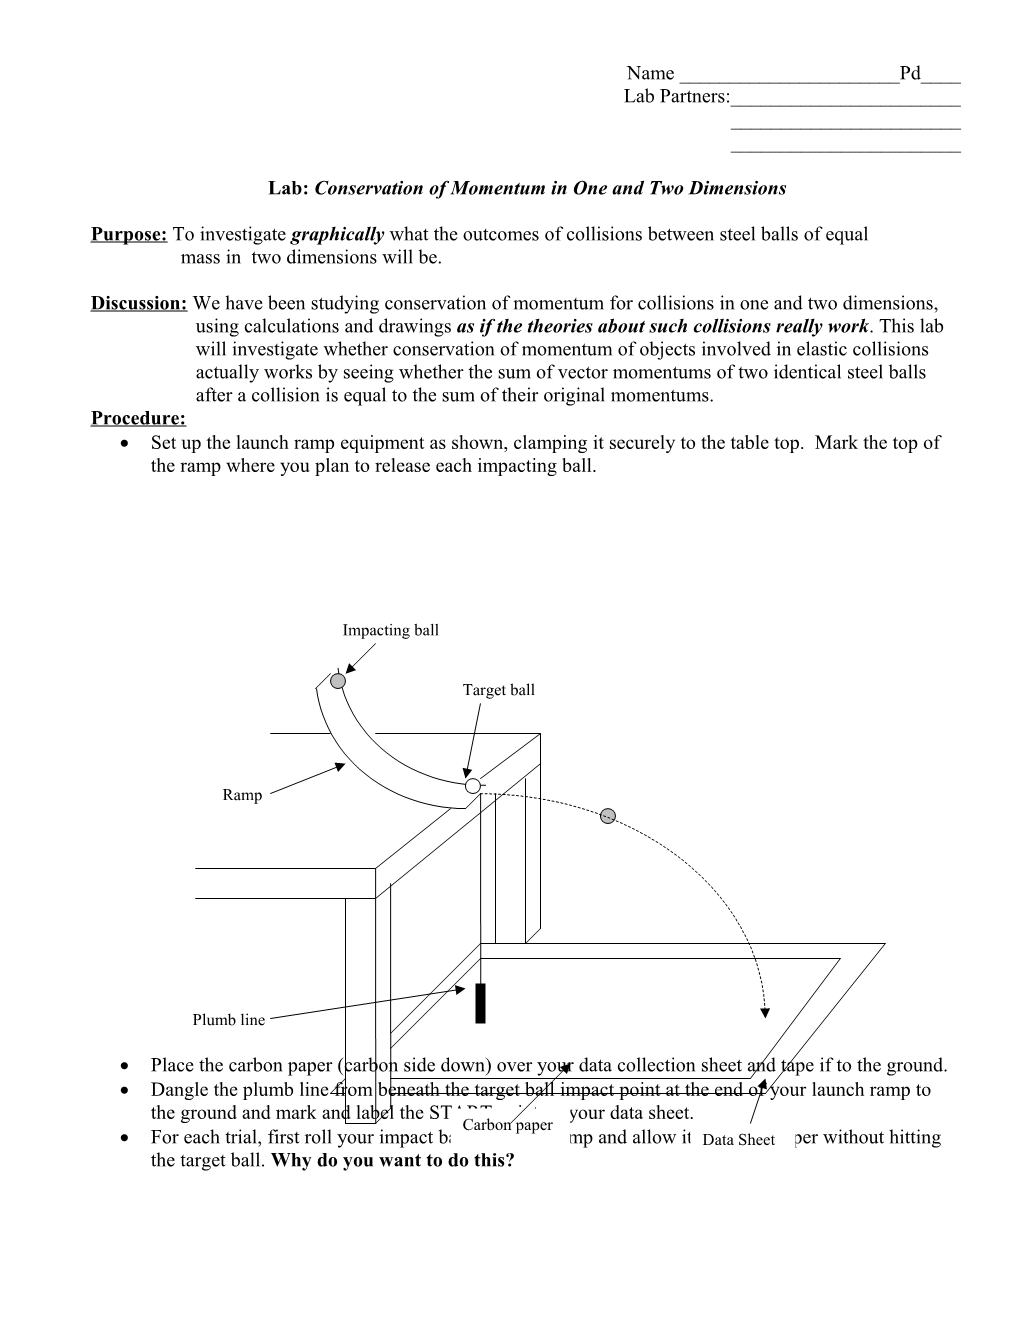 Lab: Conservation of Momentum in One and Two Dimensions